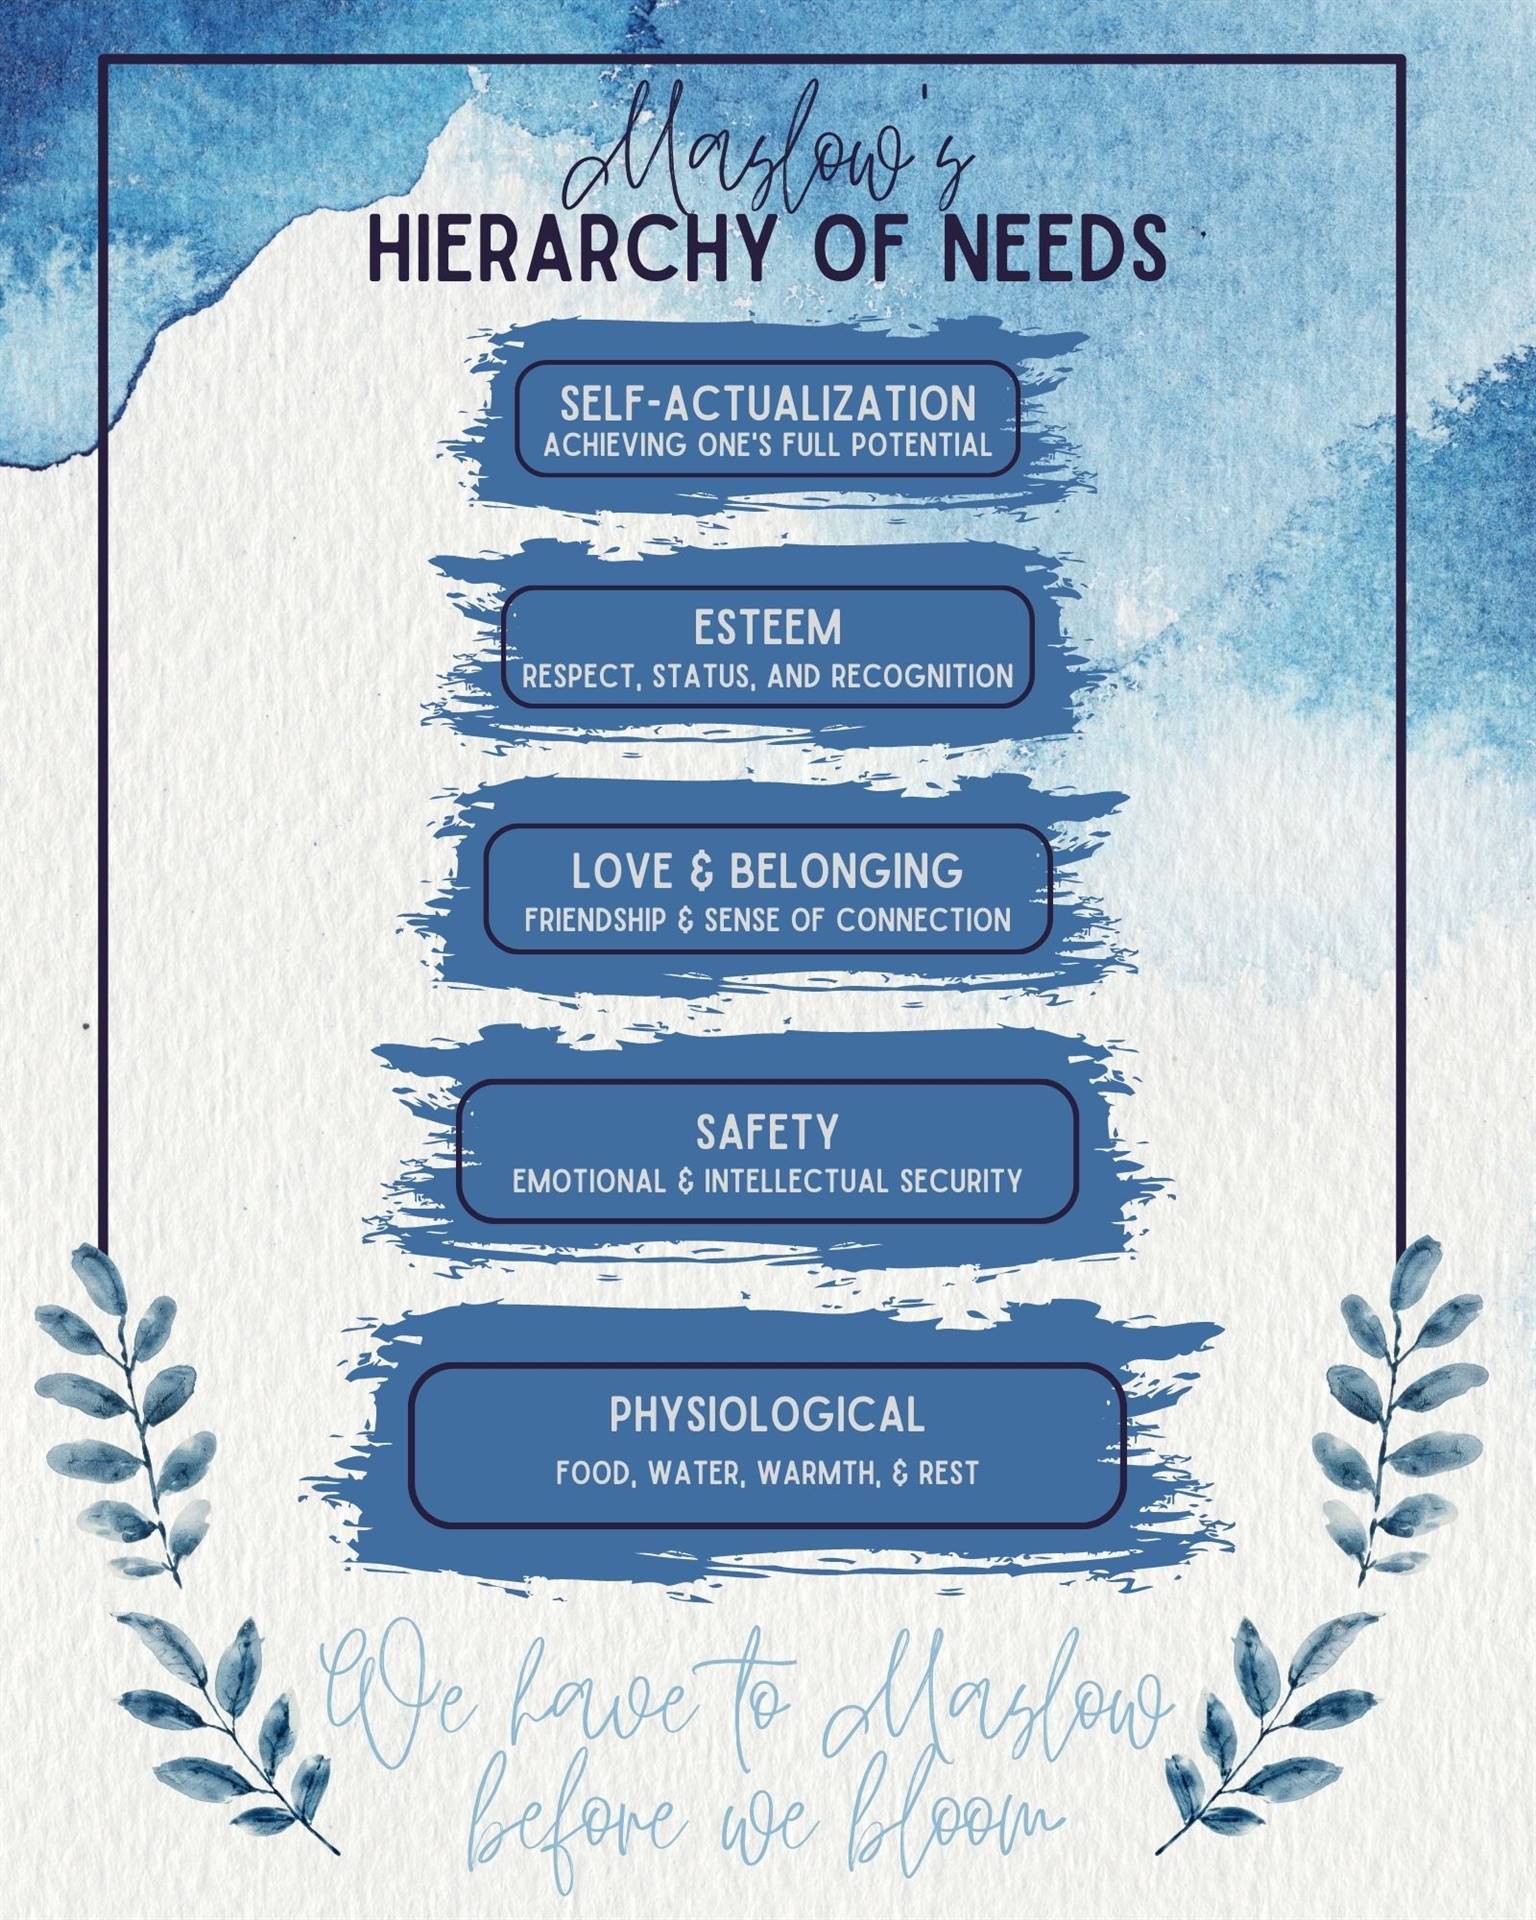 Hierarchy of Needs 